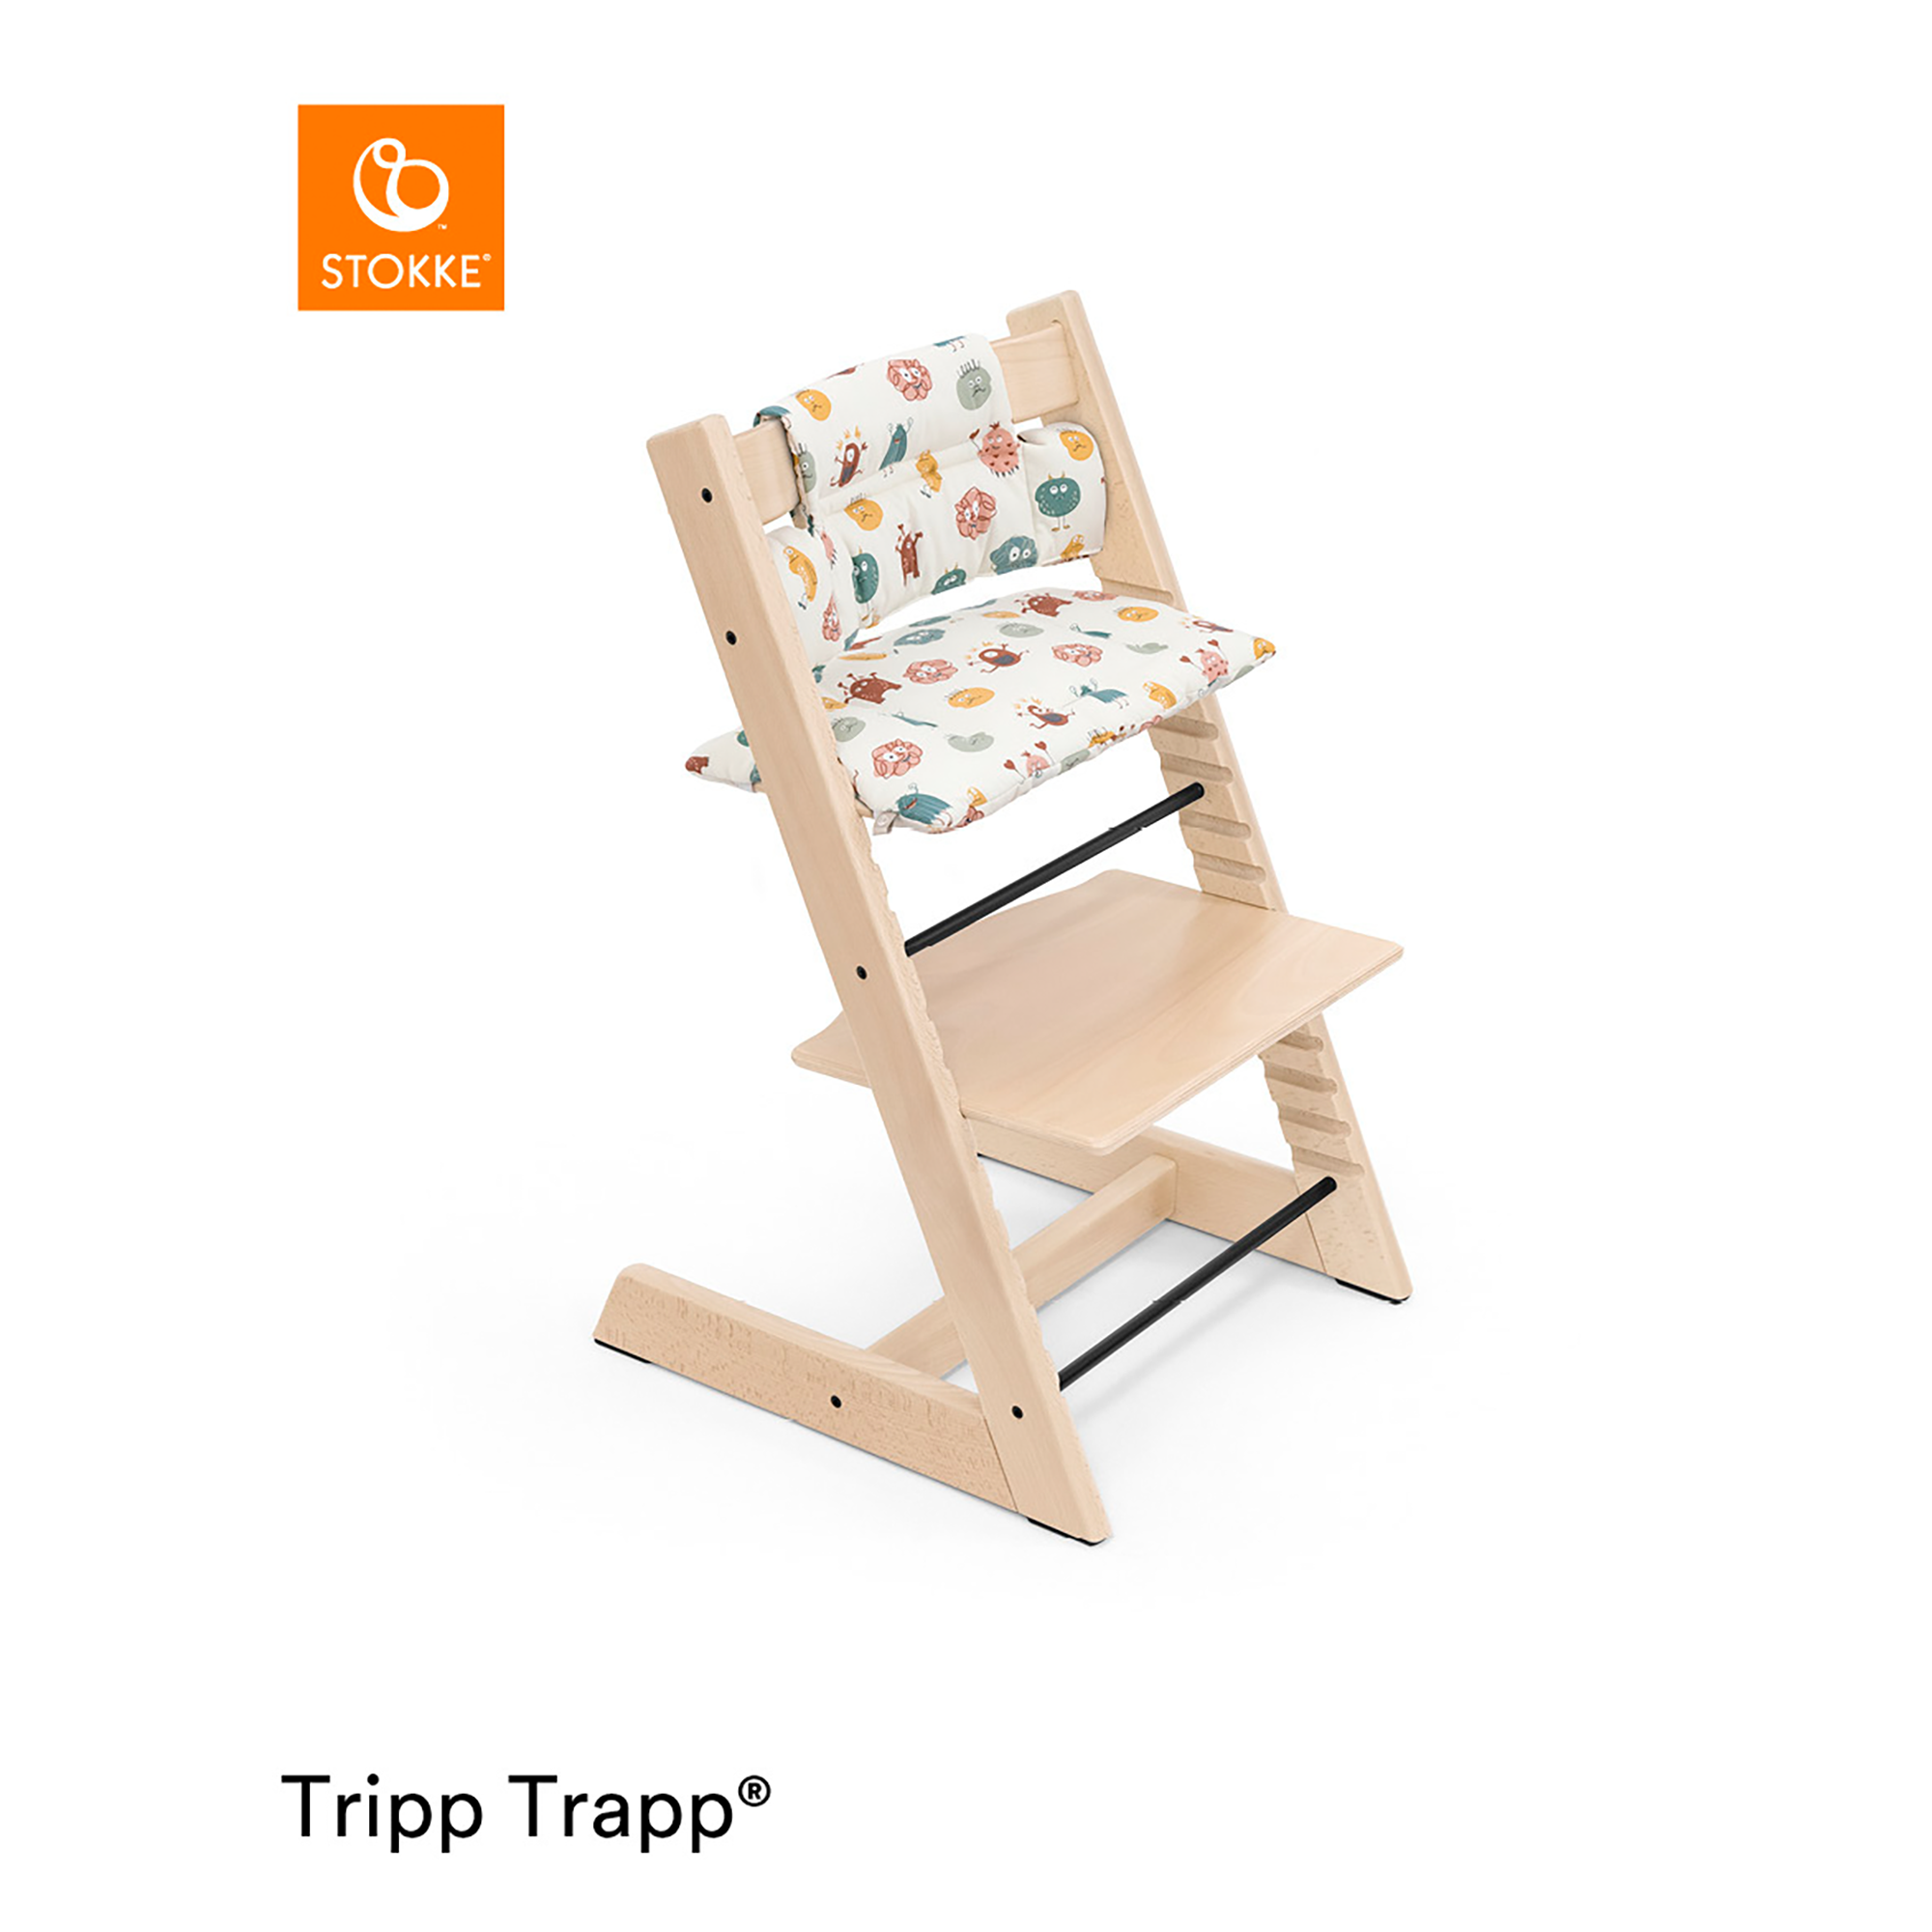 Tripp Trapp® Classic Kissen Silly Monsters STOKKE Rosa 2000580869606 2